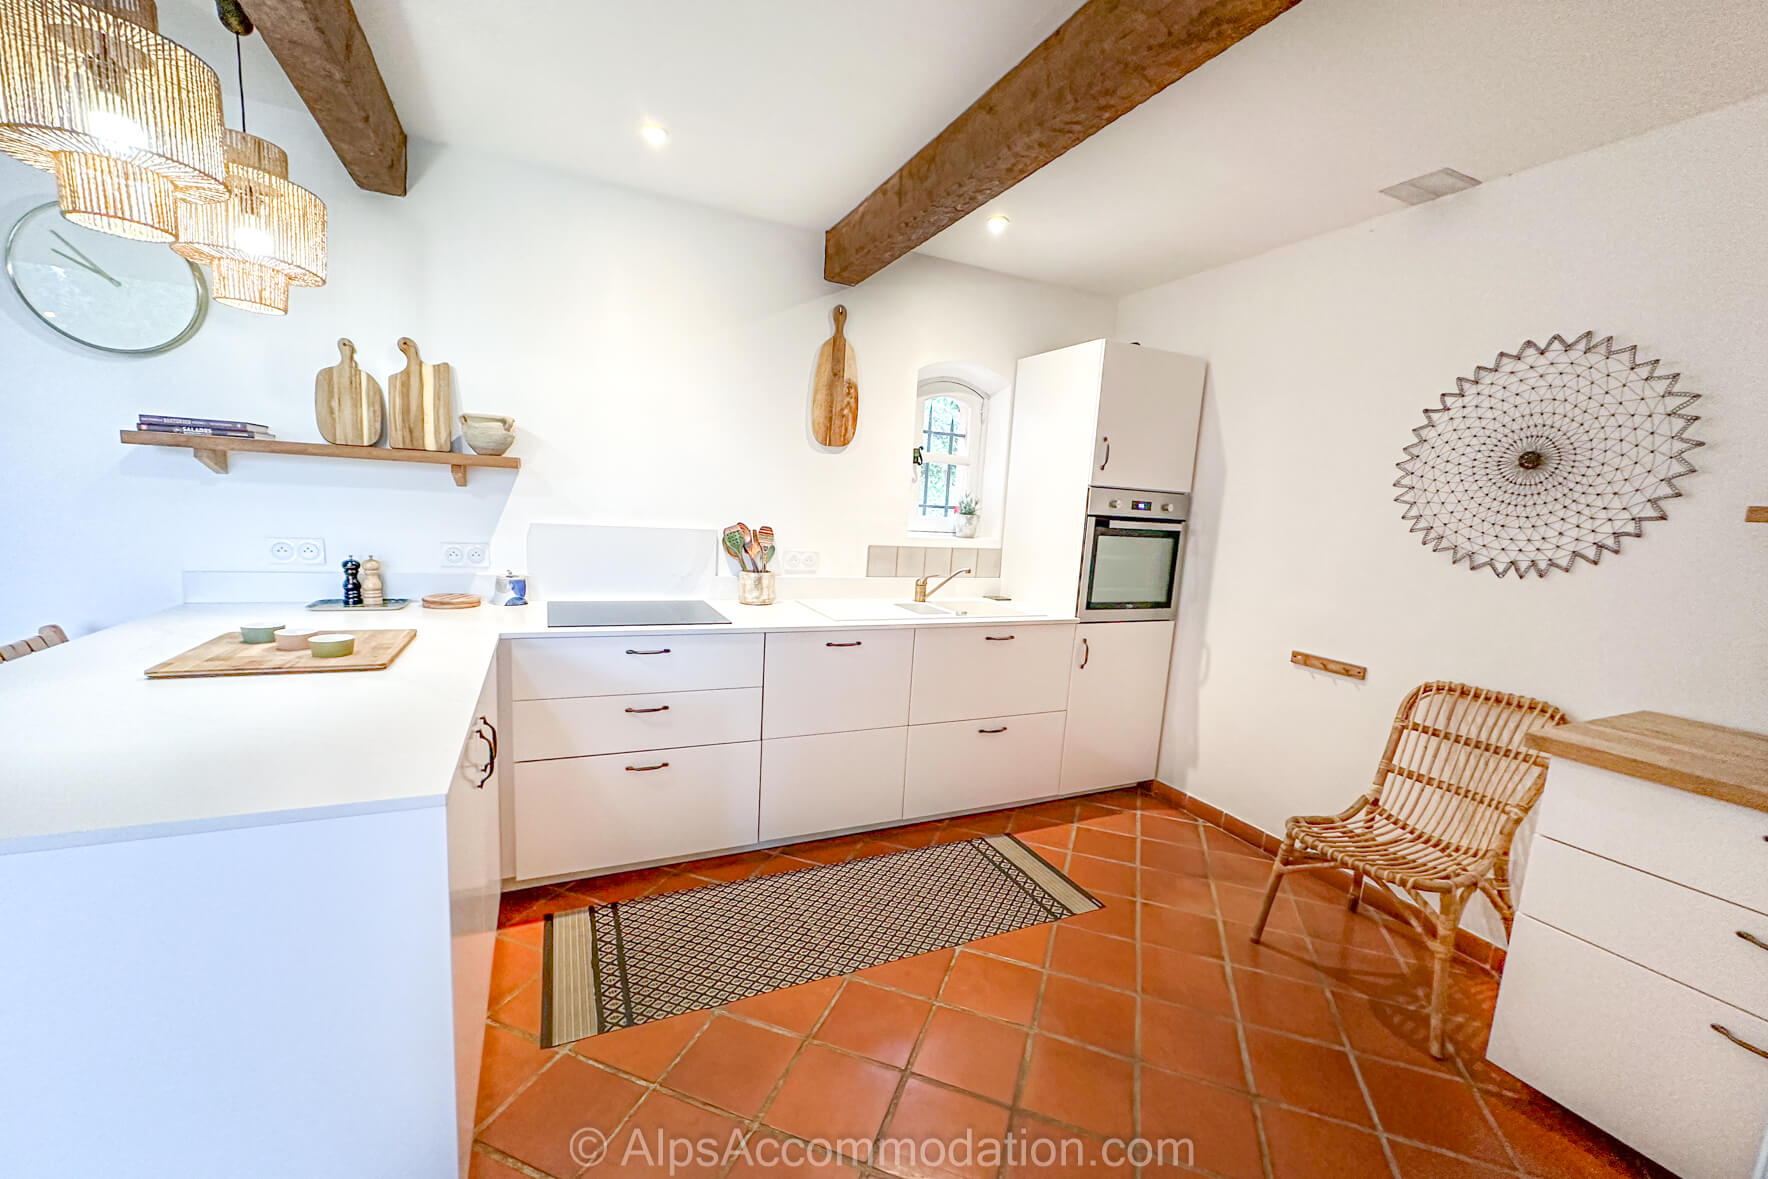 Les Mas Aups - Fully equipped kitchen with large American style fridge